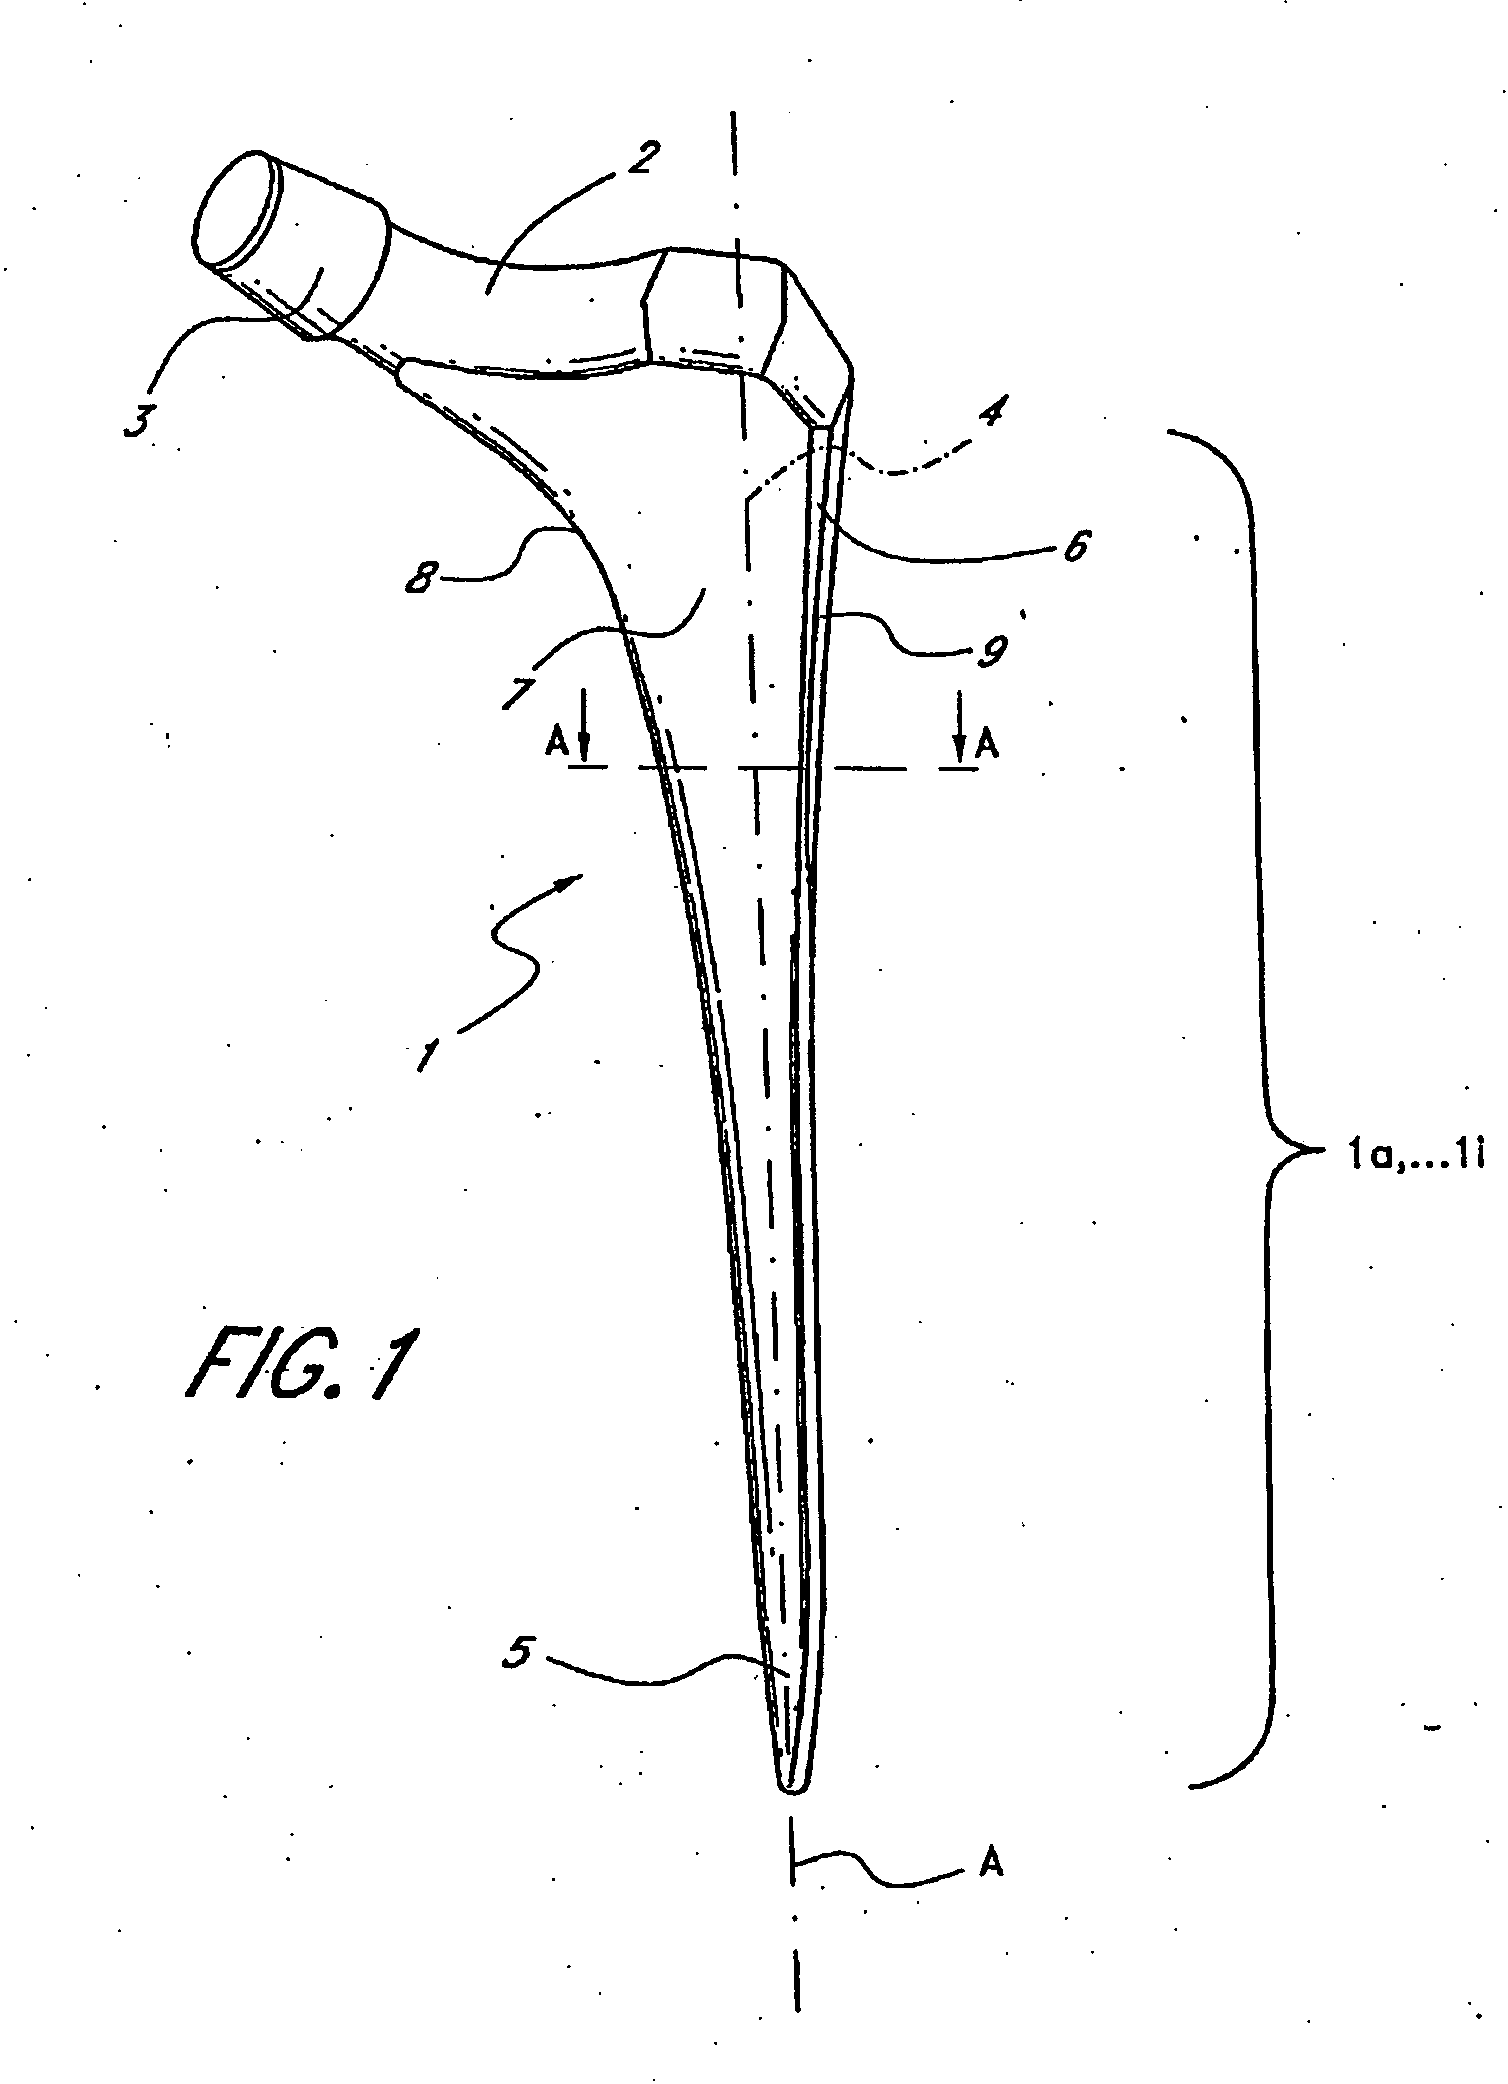 Leaflike shaft of a hip-joint prosthesis for anchoring in the femur